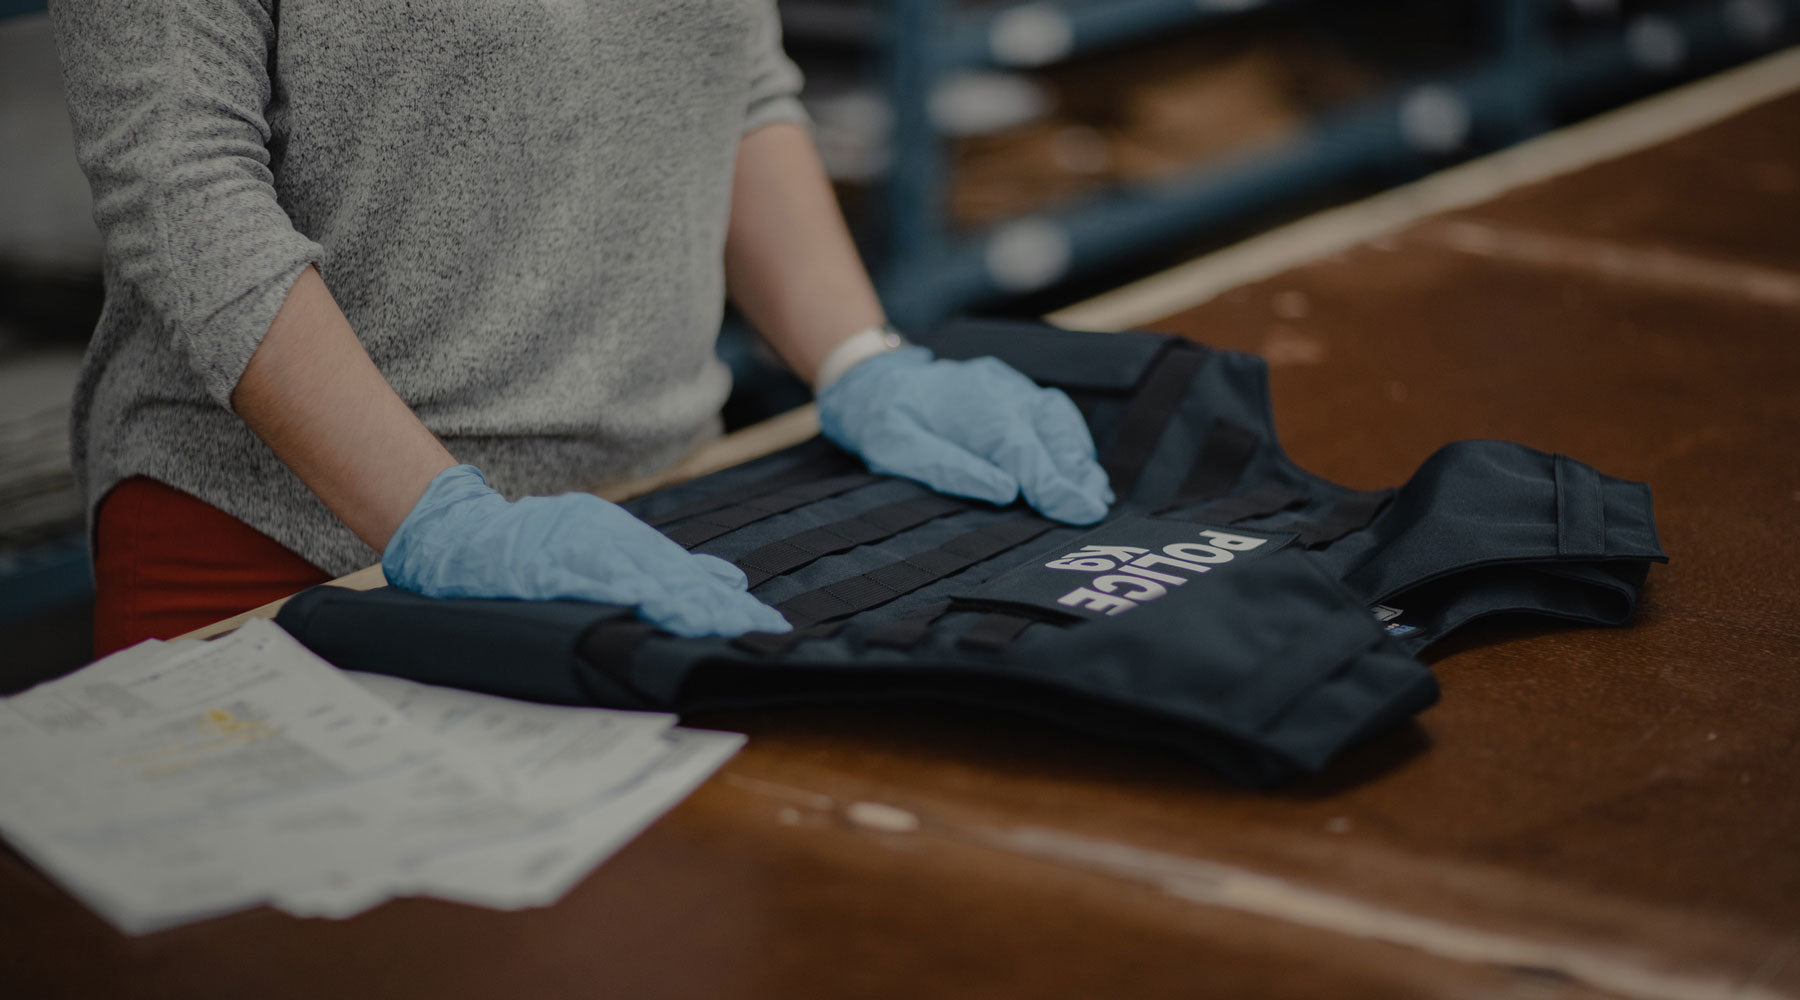 Image of Premier Body Armor manufacturers creating the NIJ certified law enforcement vest. Shop products from the best body armor company that armors law enforcement, private security, and everyday civilians. Shop tactical gear and bulletproof backpacks. 